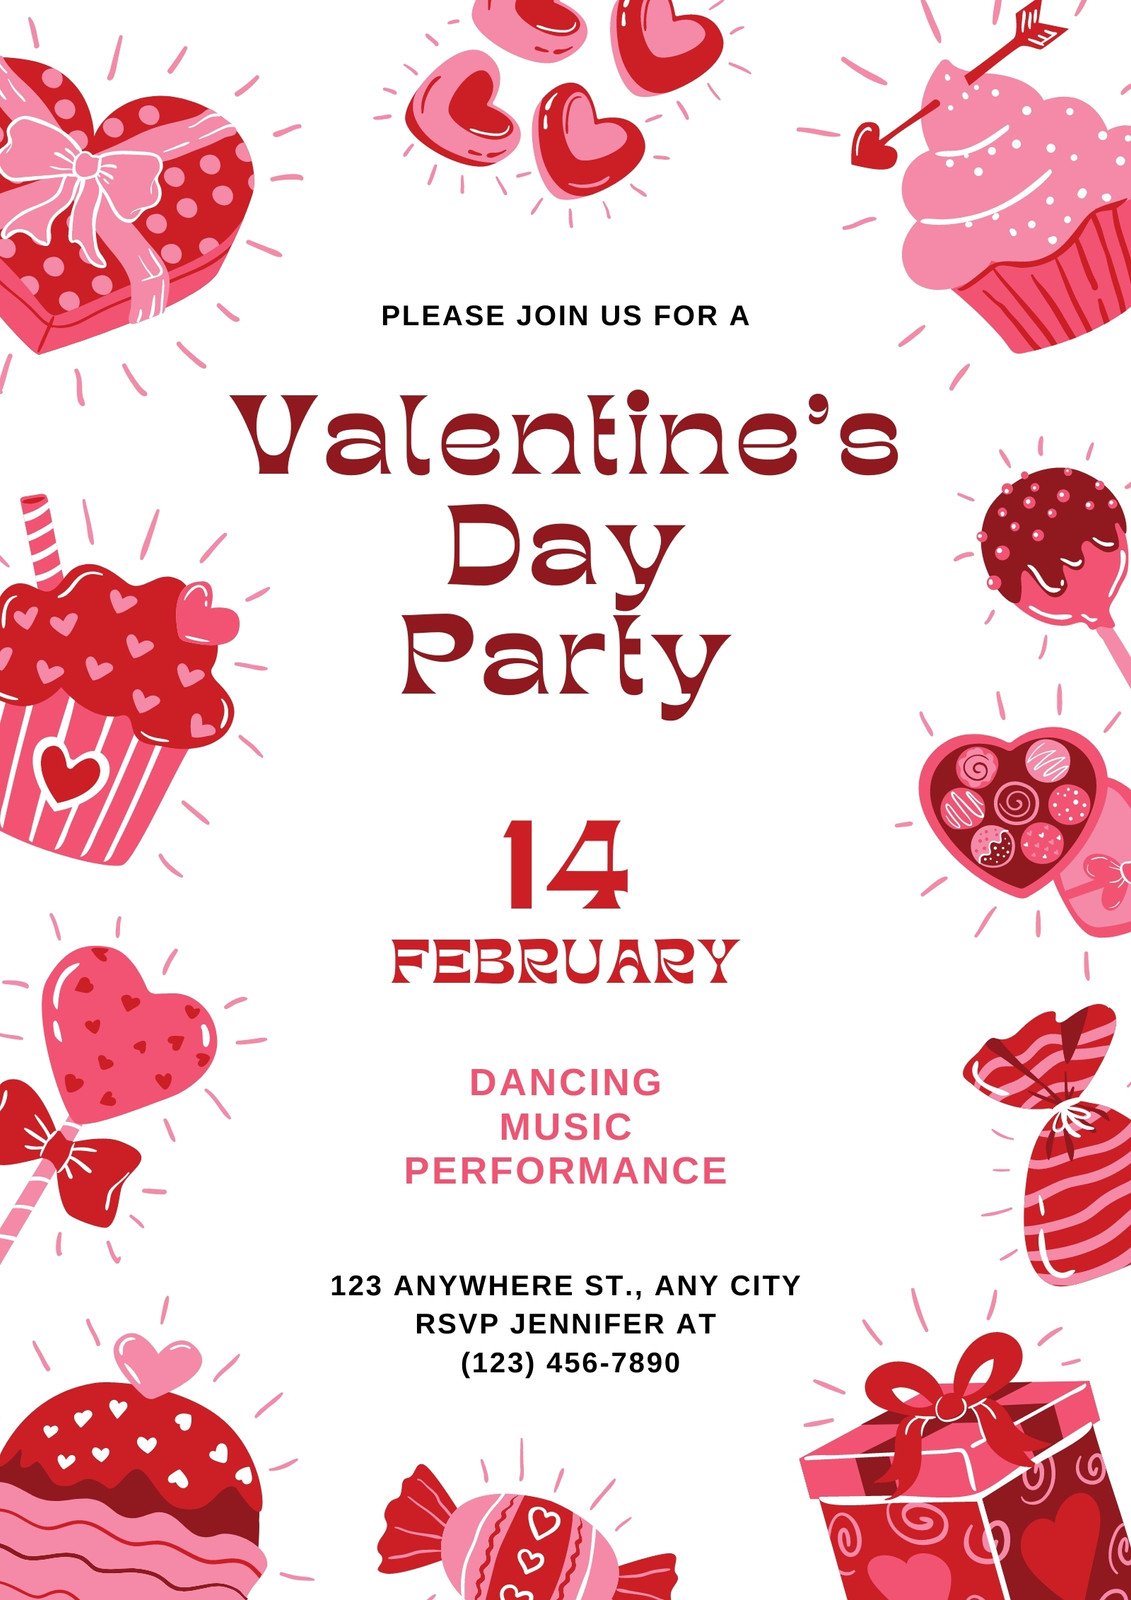 NEW VALENTINES DAY EVENT